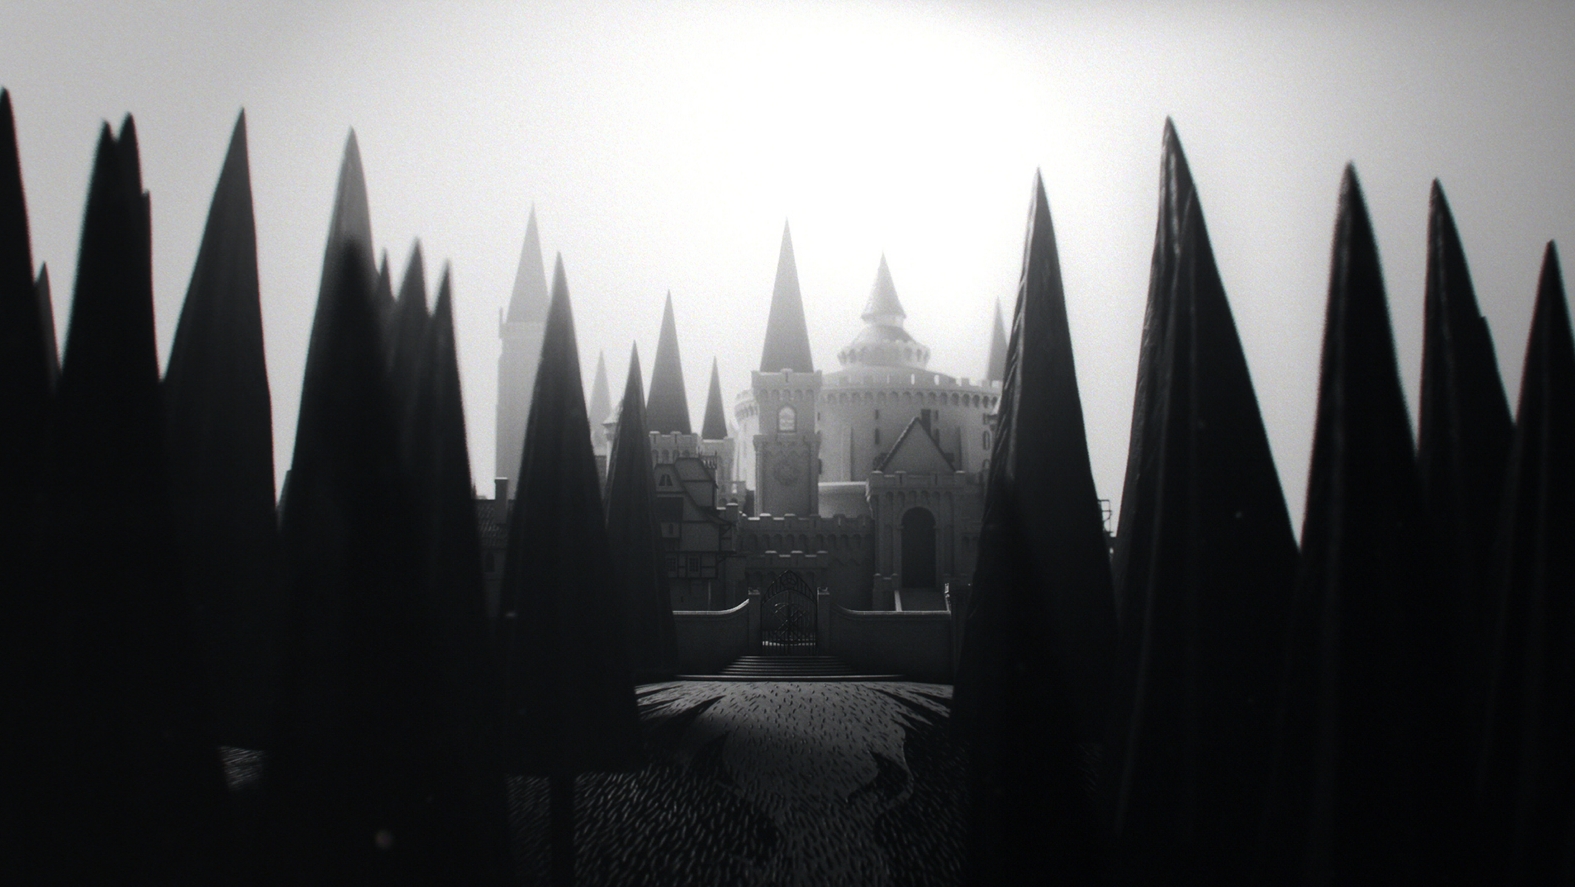 Ilvermorny School of Witchcraft and Wizardry Harry Potter: Facts About Other Wizarding Schools Besides Hogwarts